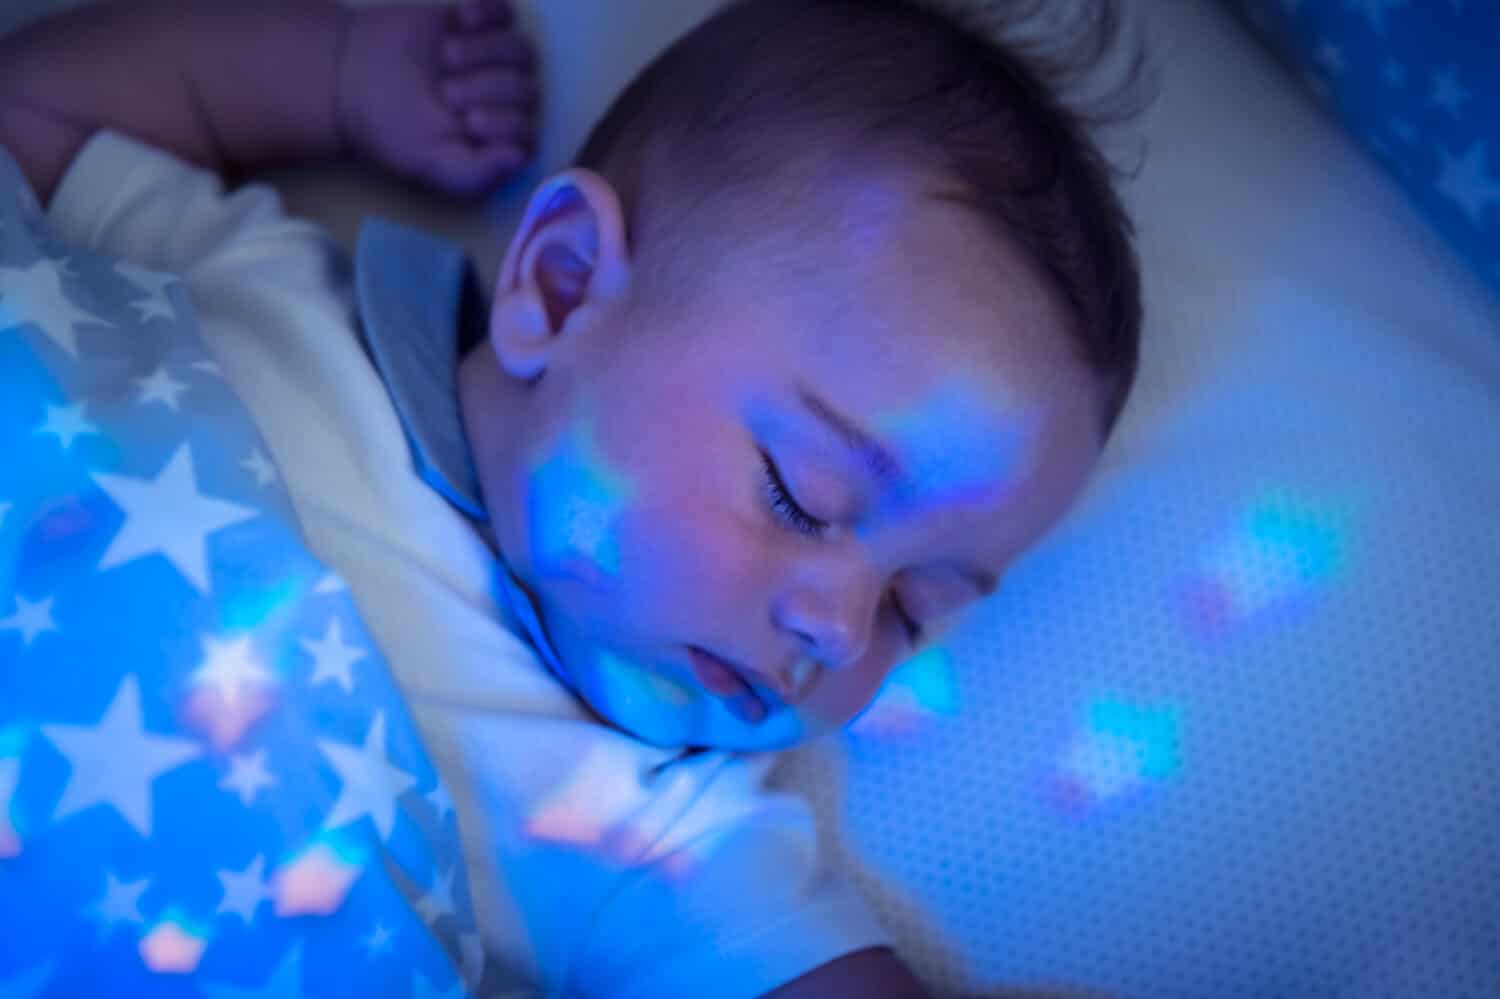 Portrait of nice sleeping baby boy, pretty child resting in his bed, star-shaped night light, healthy and peaceful childhood, new life concept